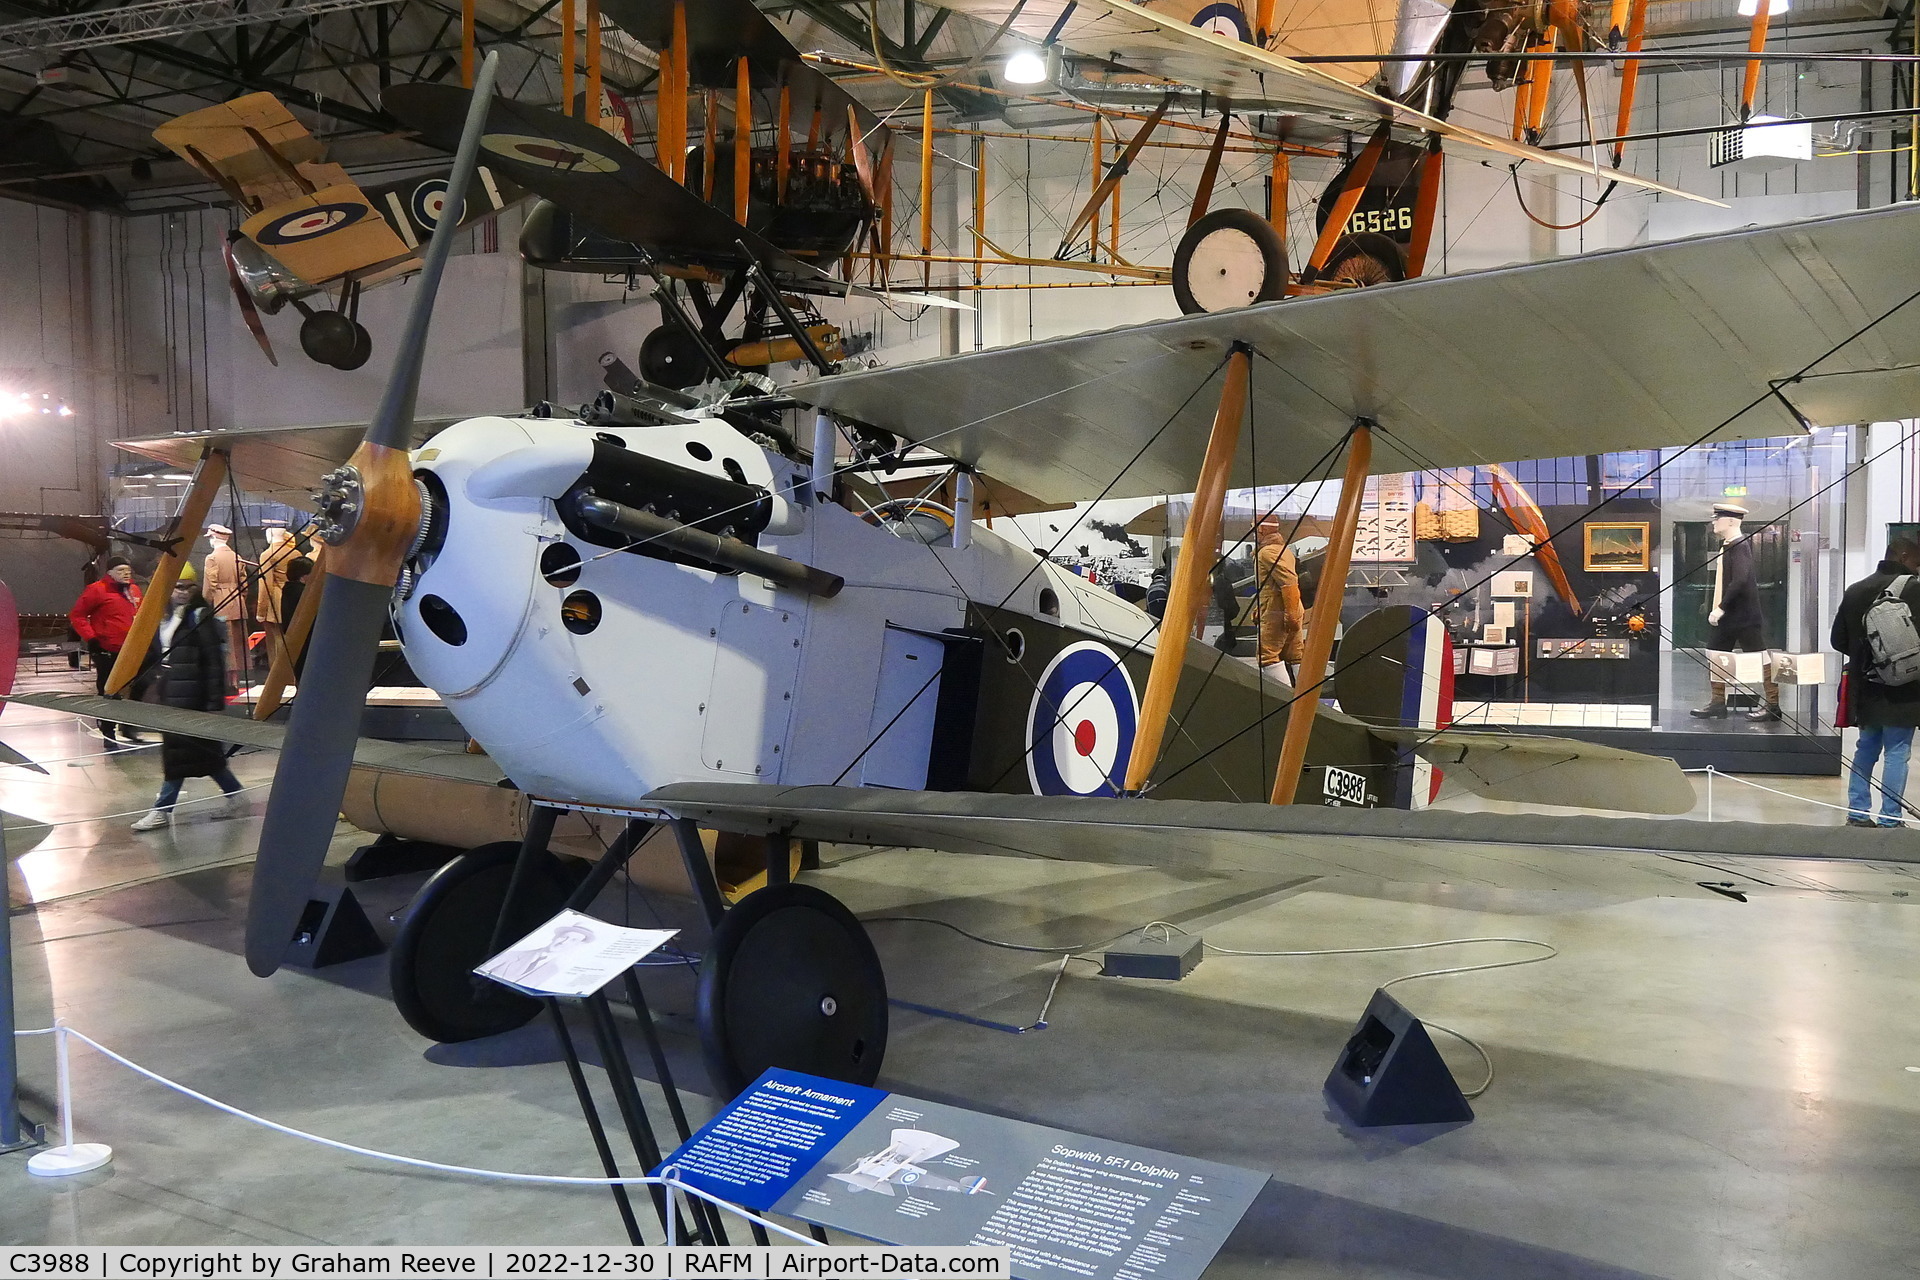 C3988, Sopwith 5F.1 Dolphin Replica C/N C3988, On display at the RAF Museum, Hendon.